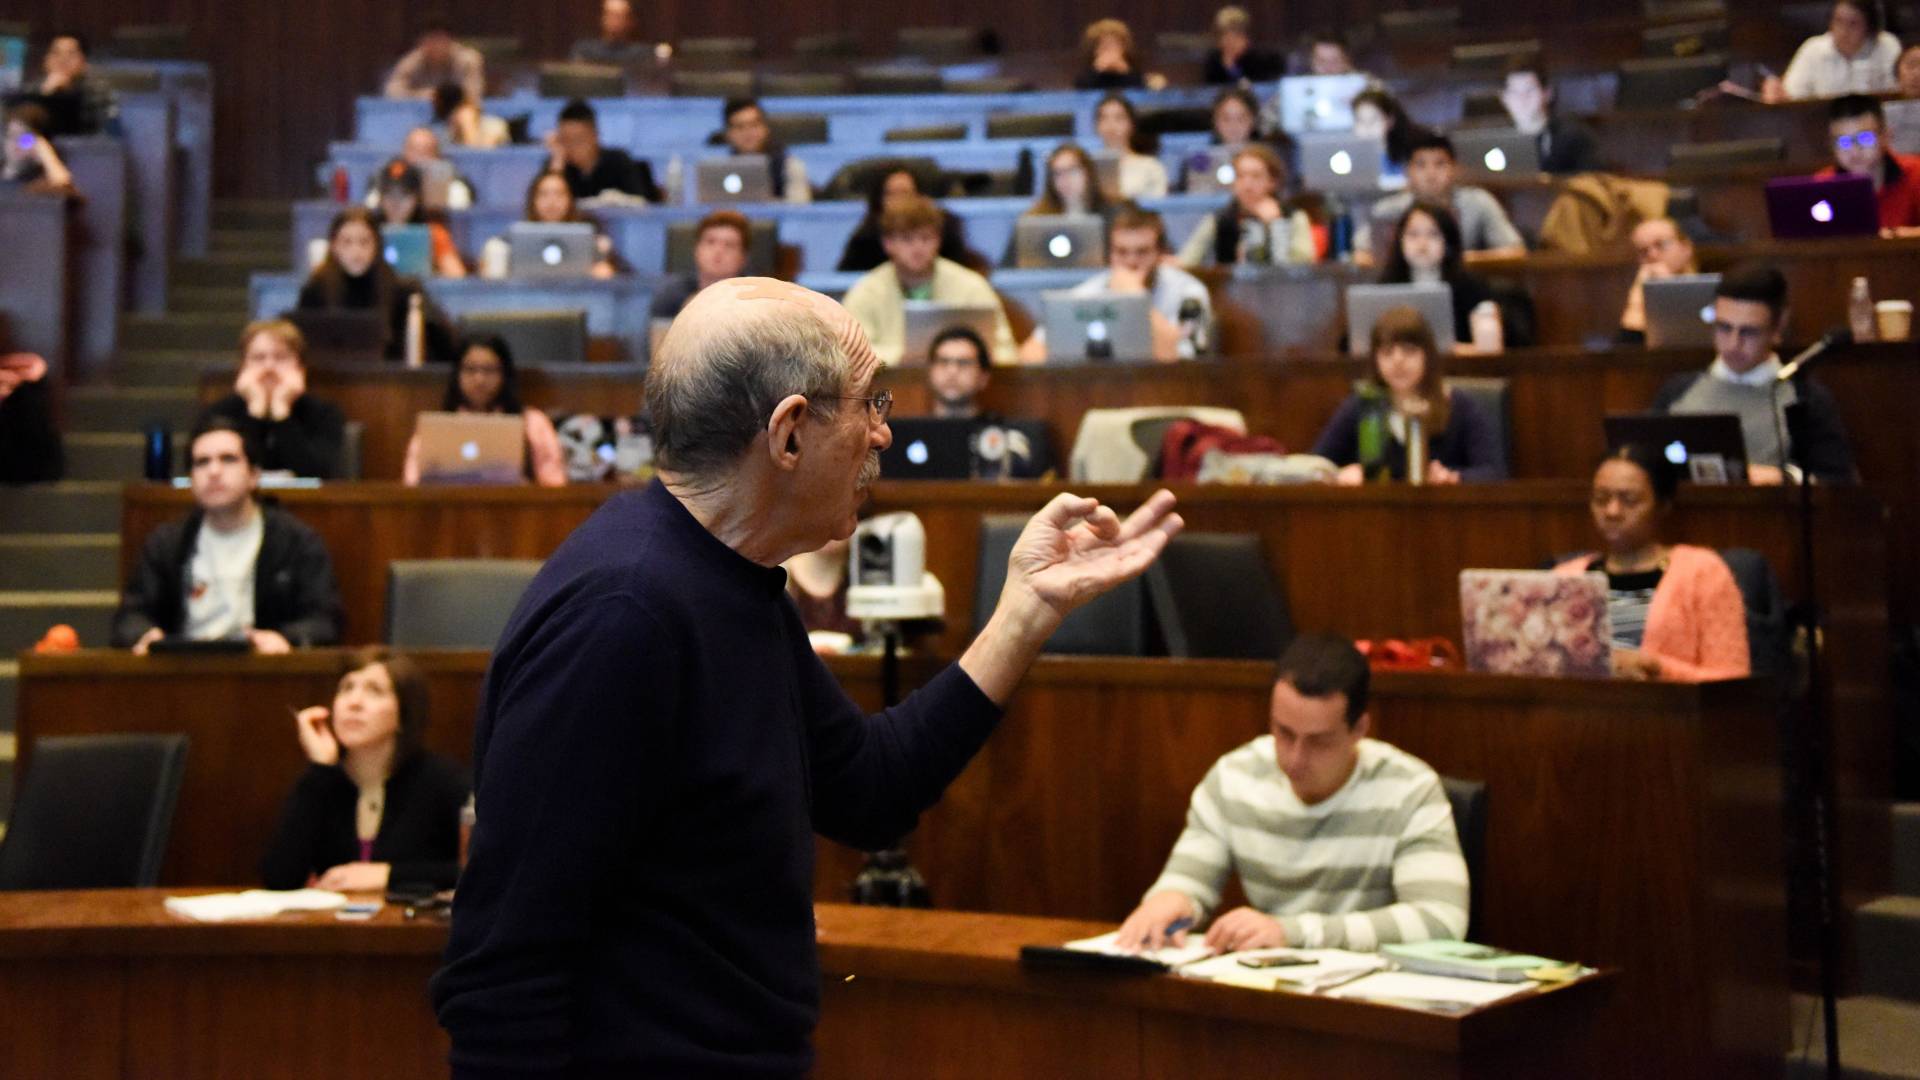 Professor talking to students in a lecture